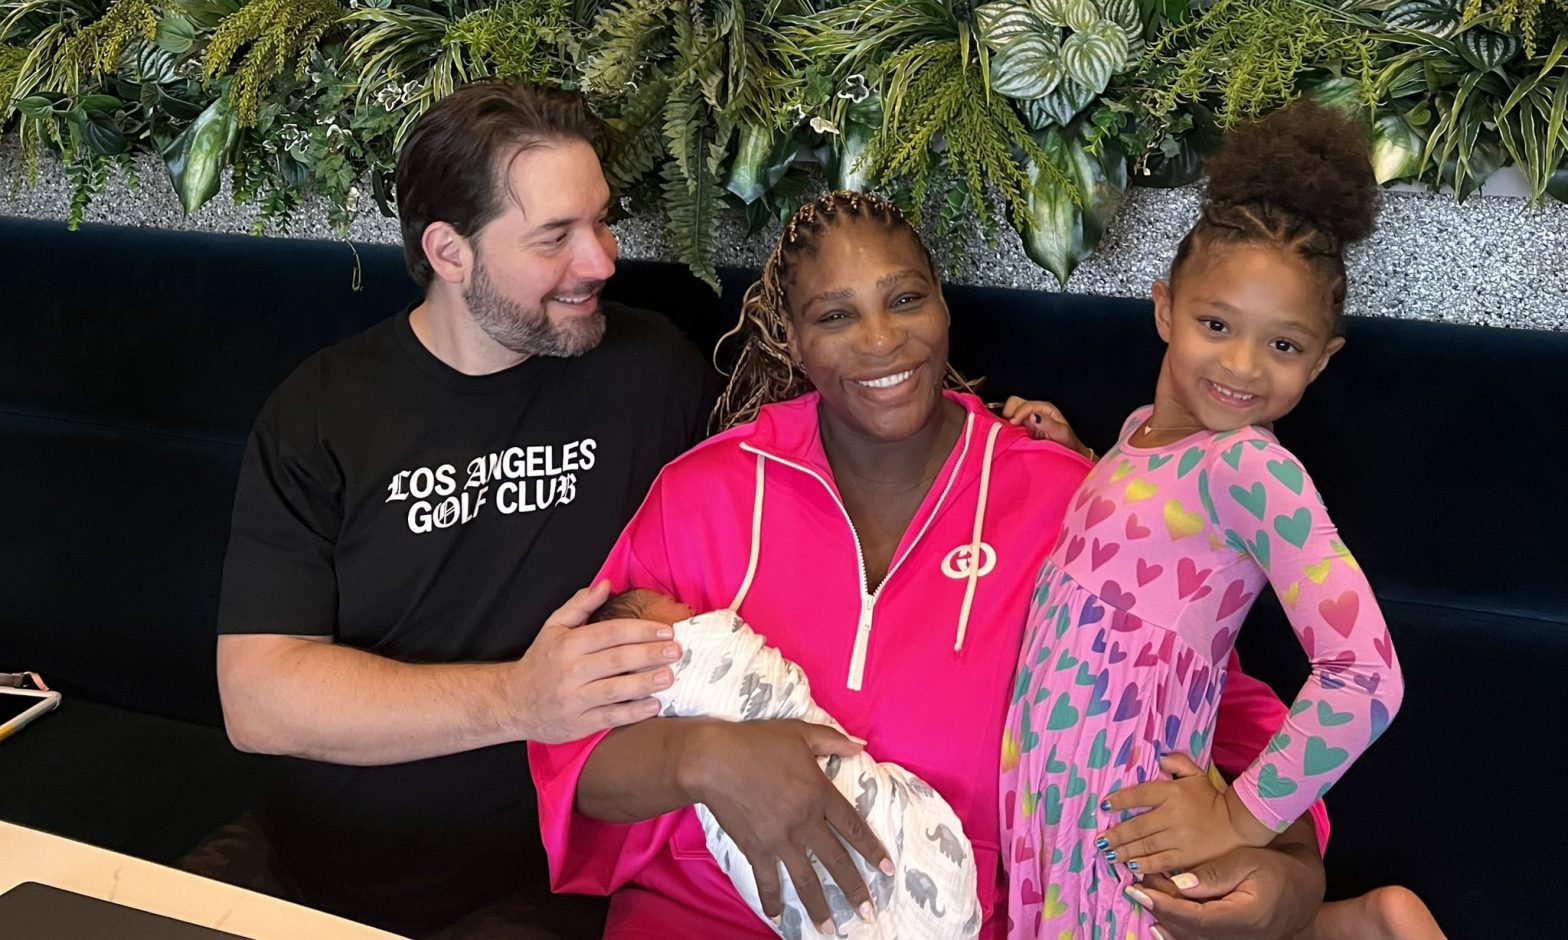 Meet Adira River Ohanian, Serena Williams’ second baby with Alexis Ohanian